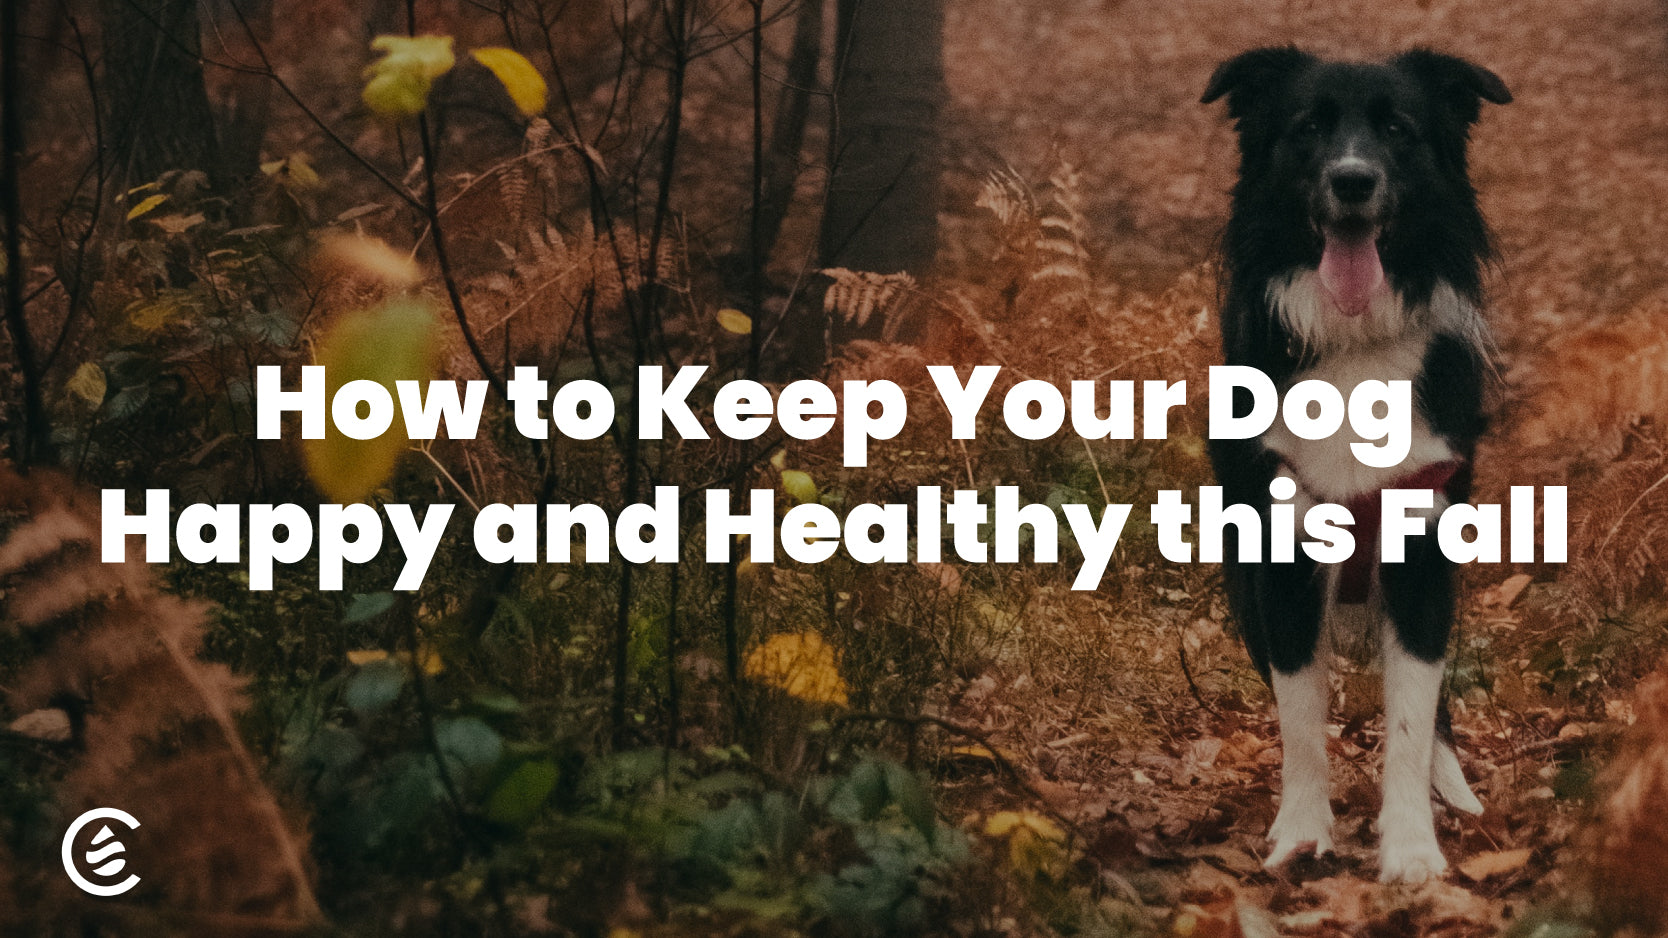 Cedarcide blog lead image, How to Keep Your Dog Happy and Healthy this Fall